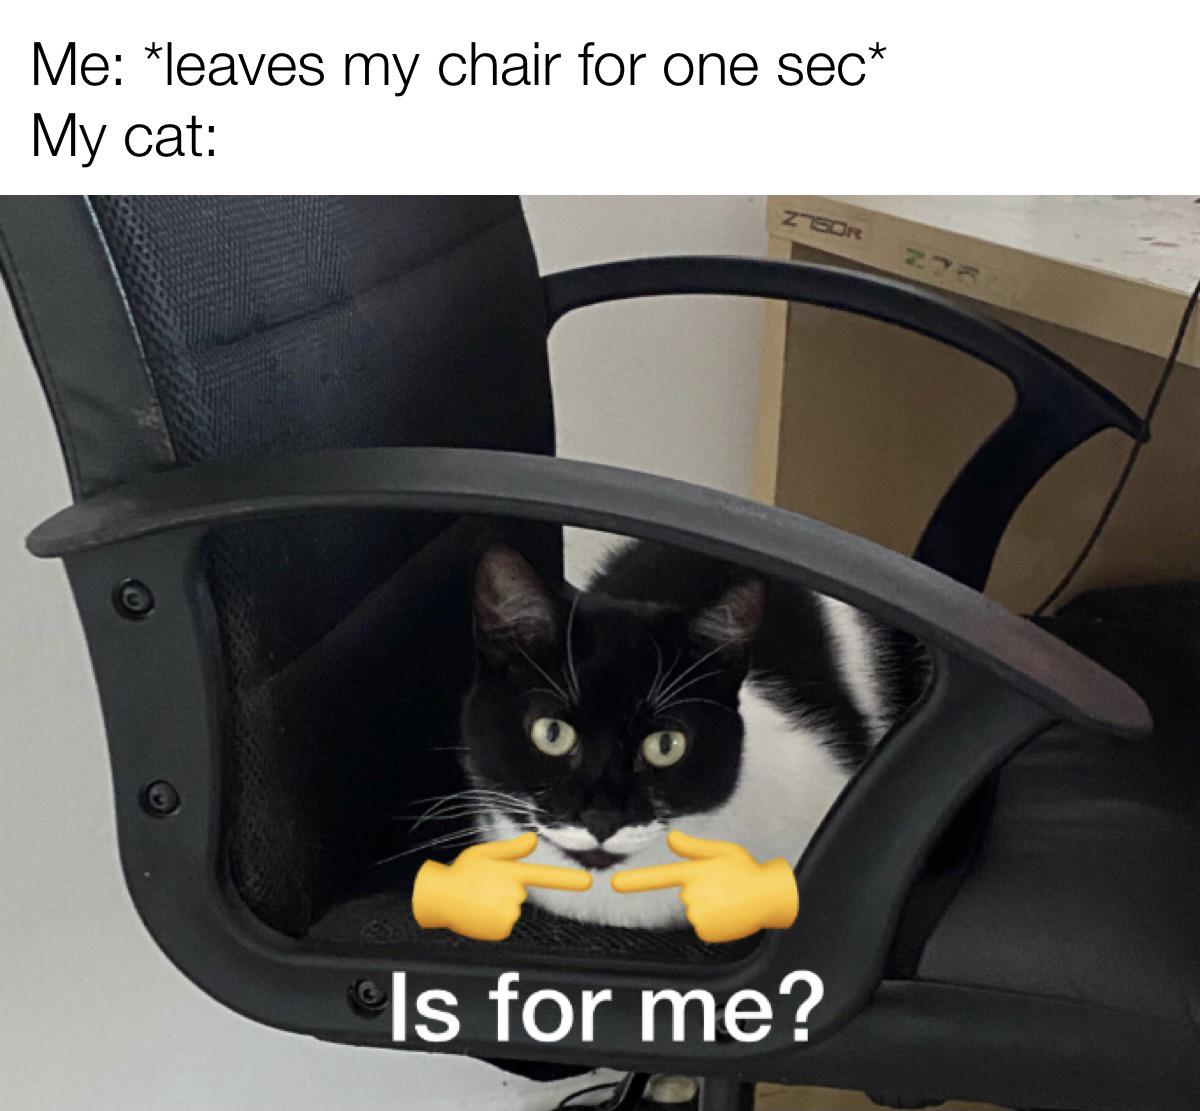 cat - Me leaves my chair for one sec My cat Zsor 27 0 0 Is for me?